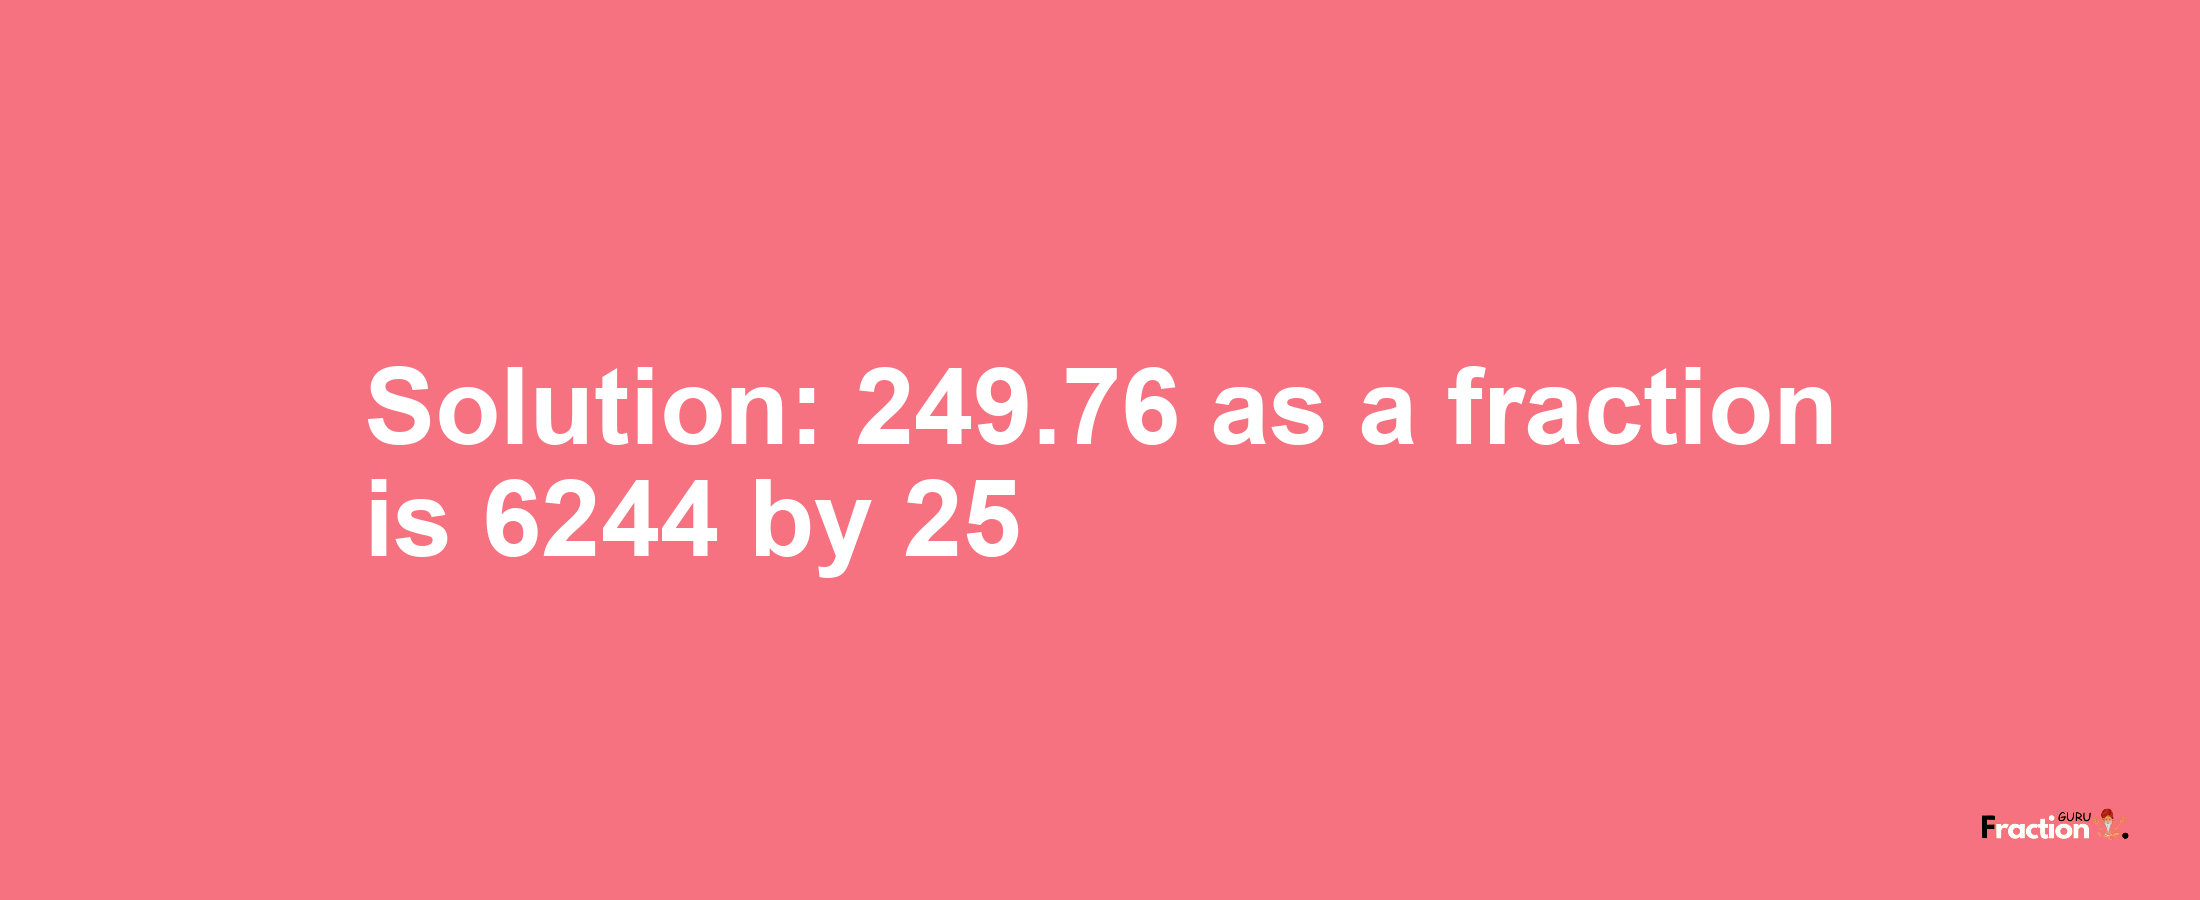 Solution:249.76 as a fraction is 6244/25